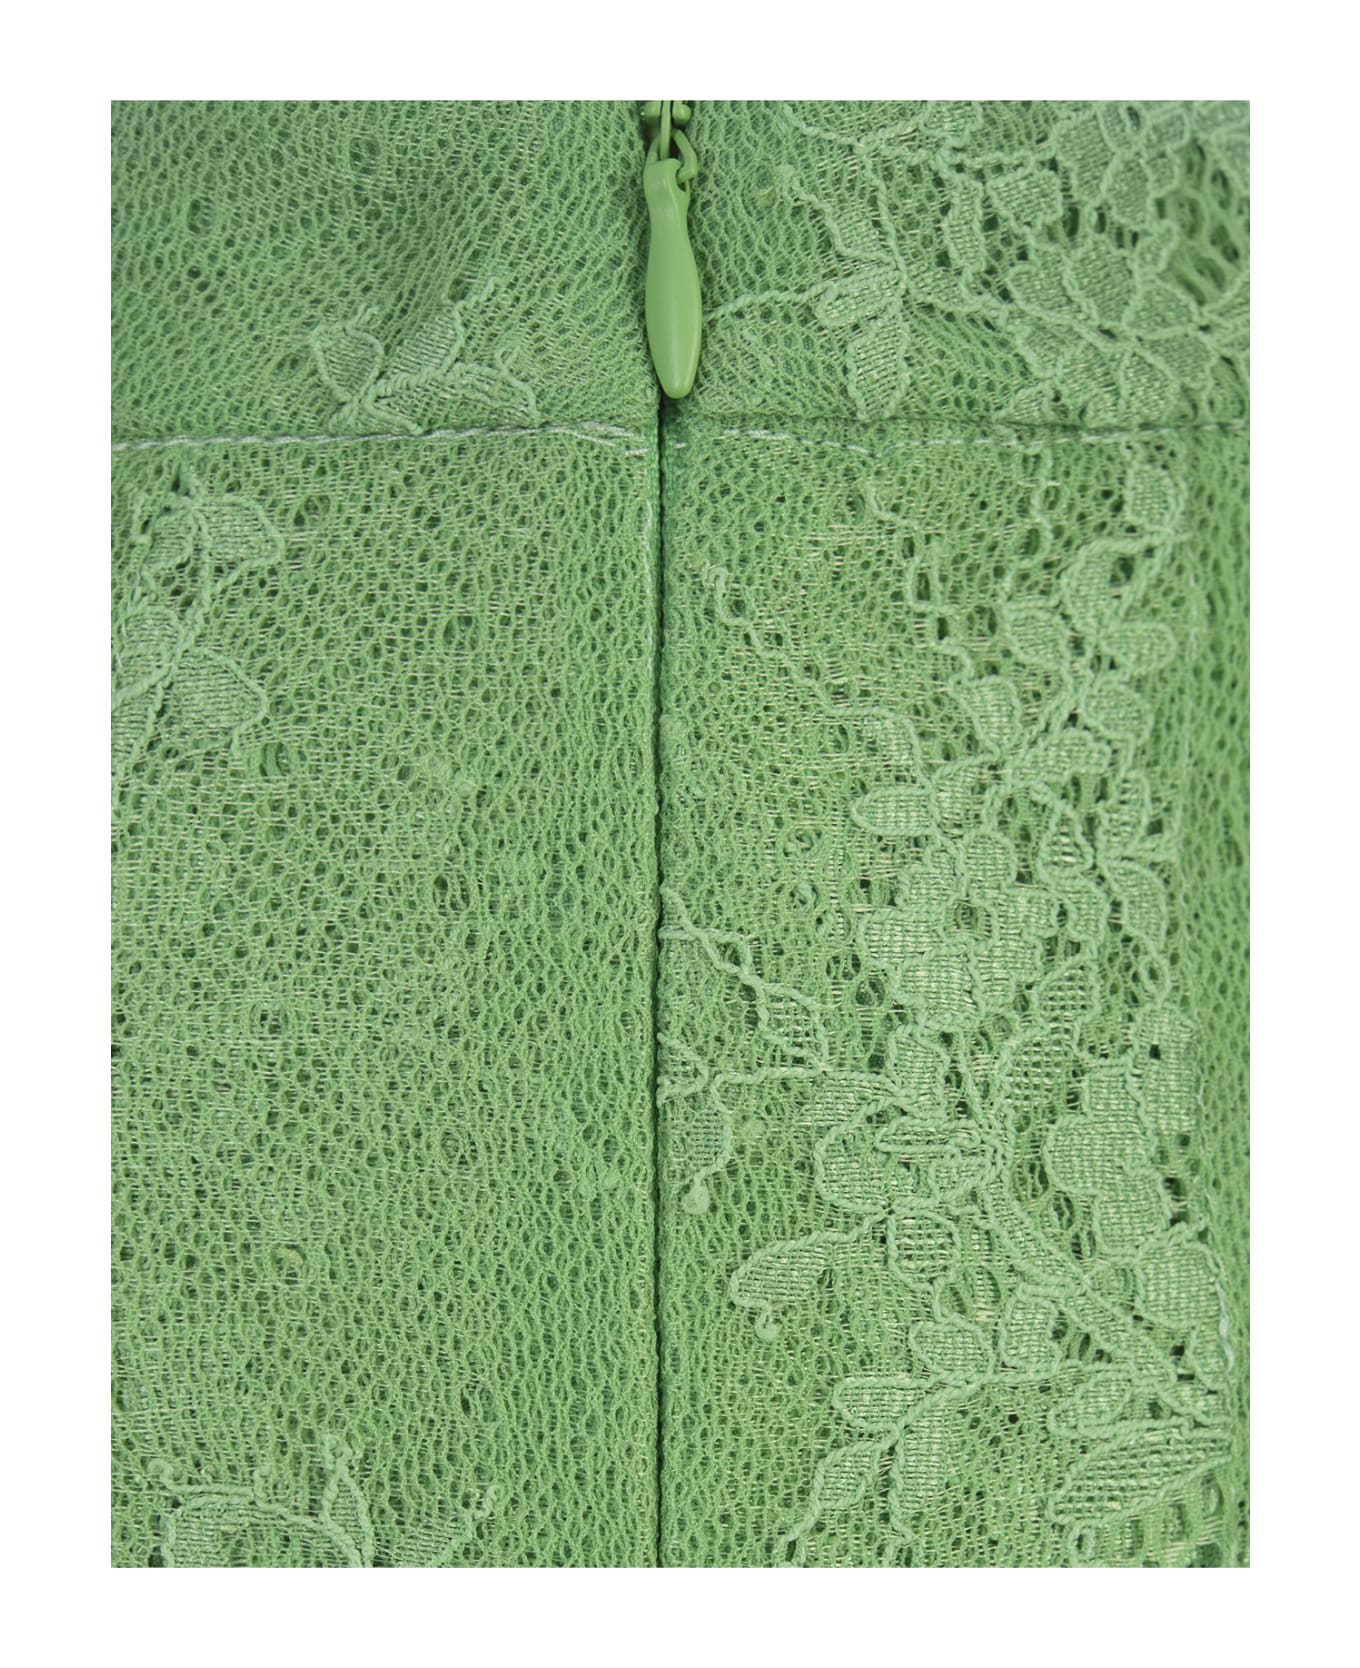 Ermanno Scervino Green Lace Pleated Skirt - Green